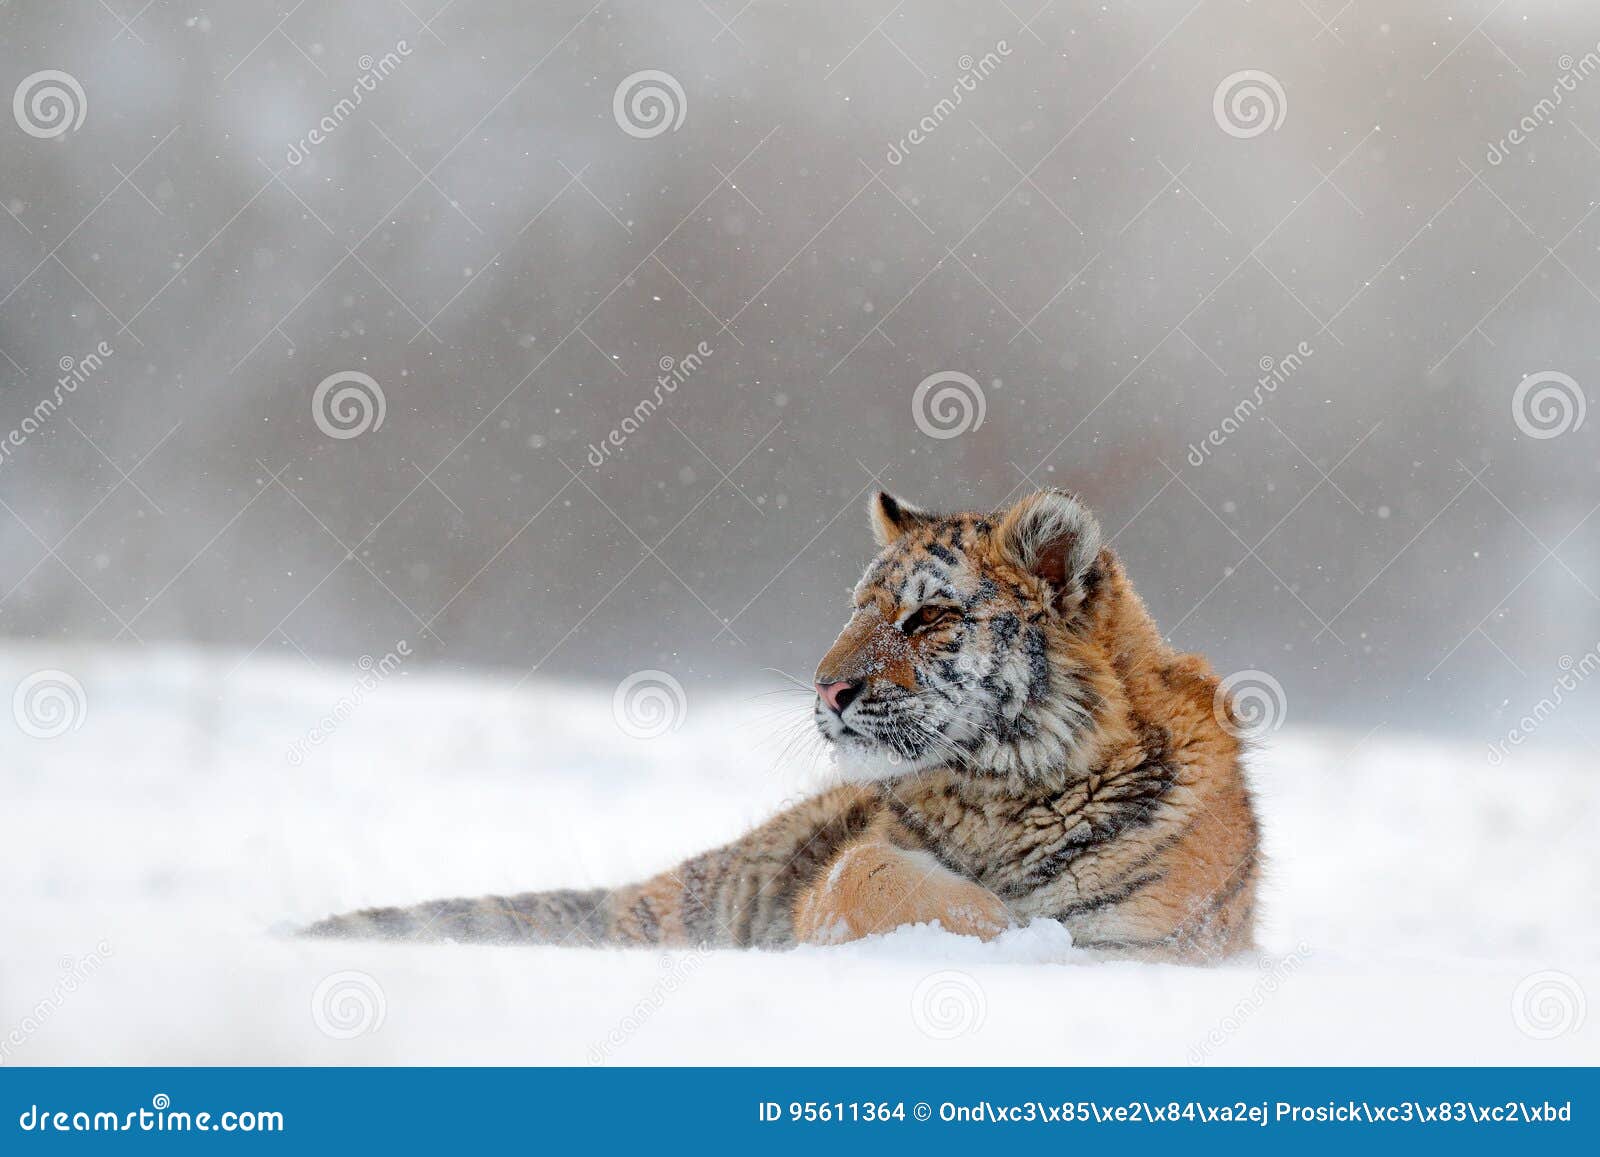 tiger in wild winter nature. amur tiger lying in the snow. action wildlife scene, danger animal. cold winter, tajga, russia. snow